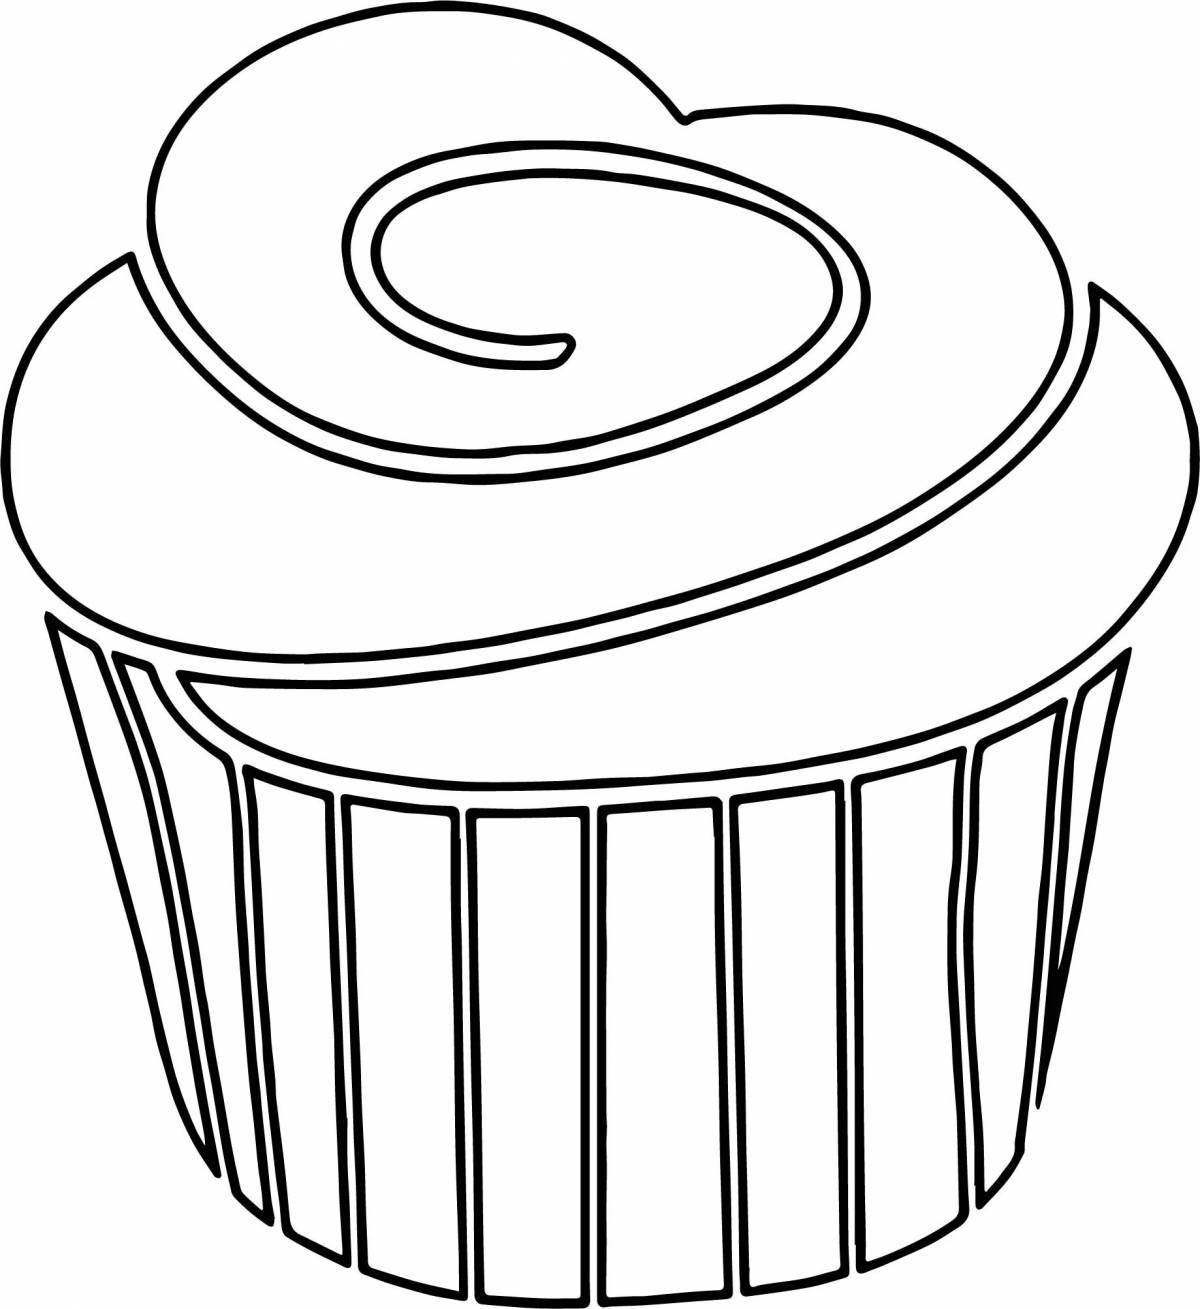 Playful candy coloring page